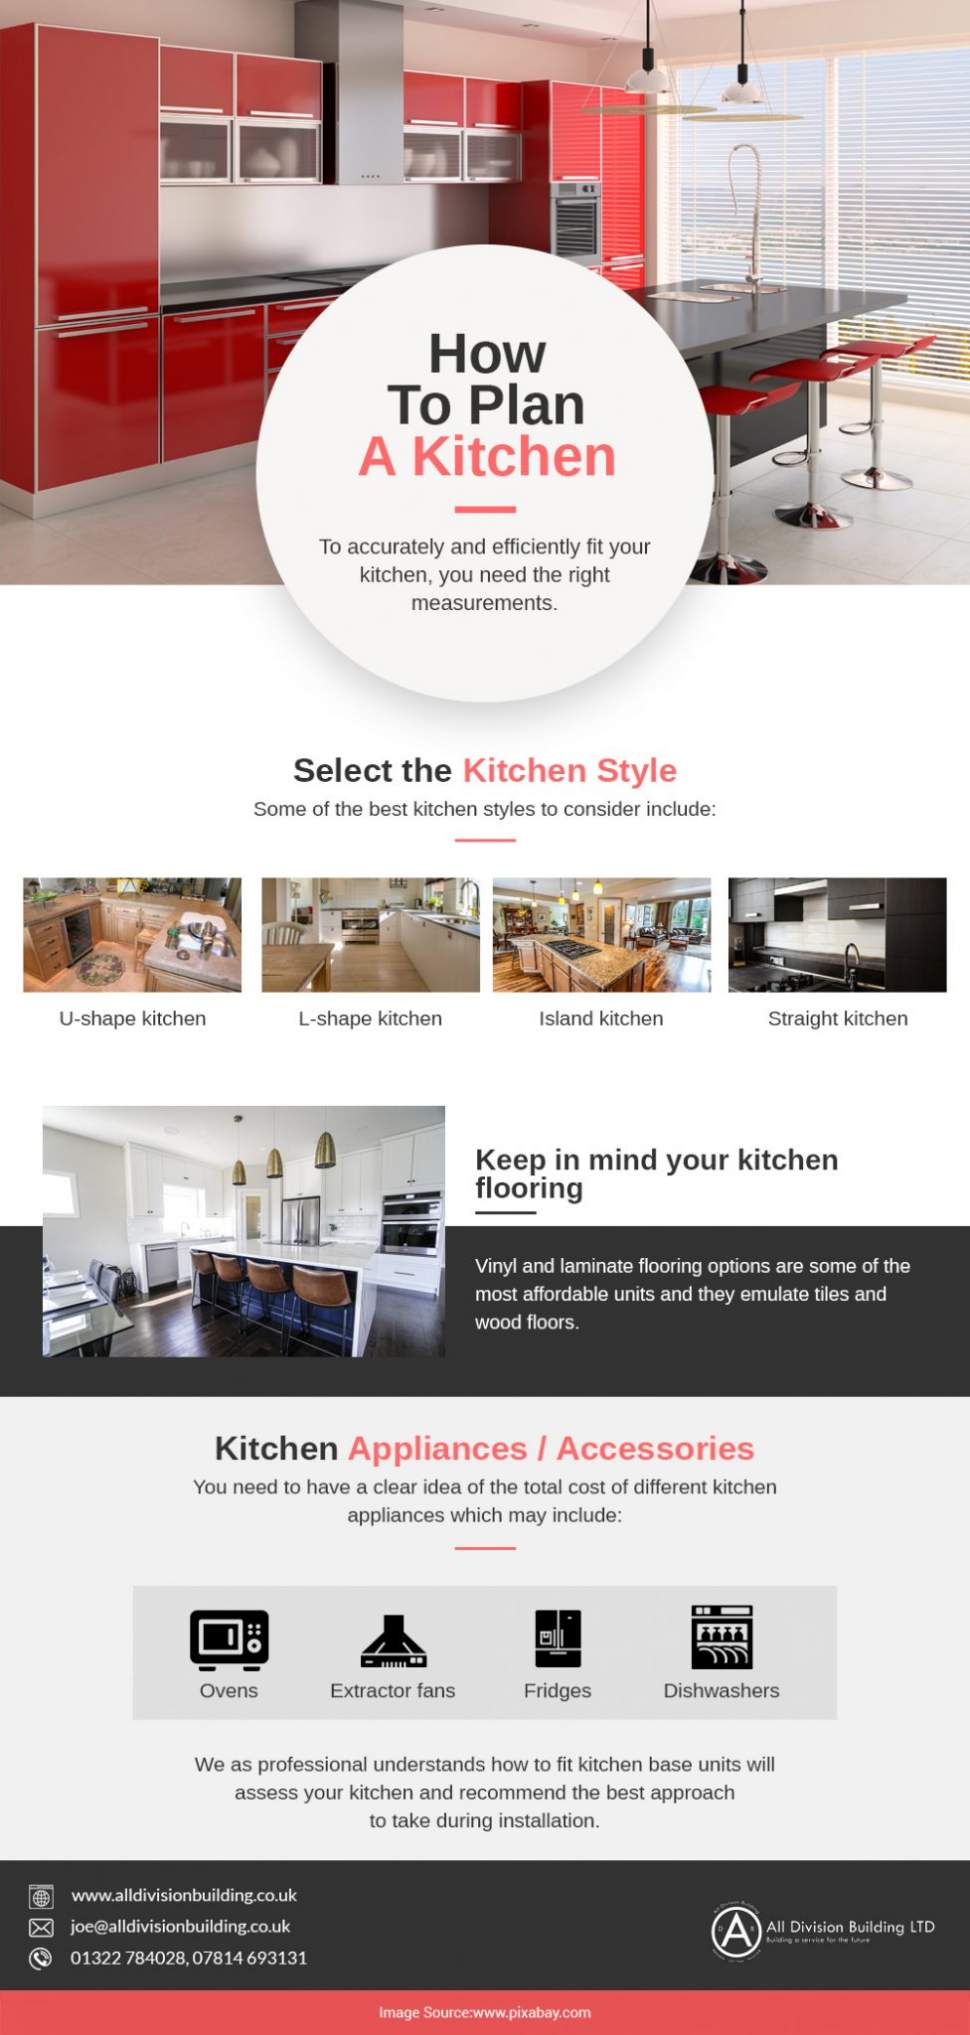 How To Plan A Kitchen